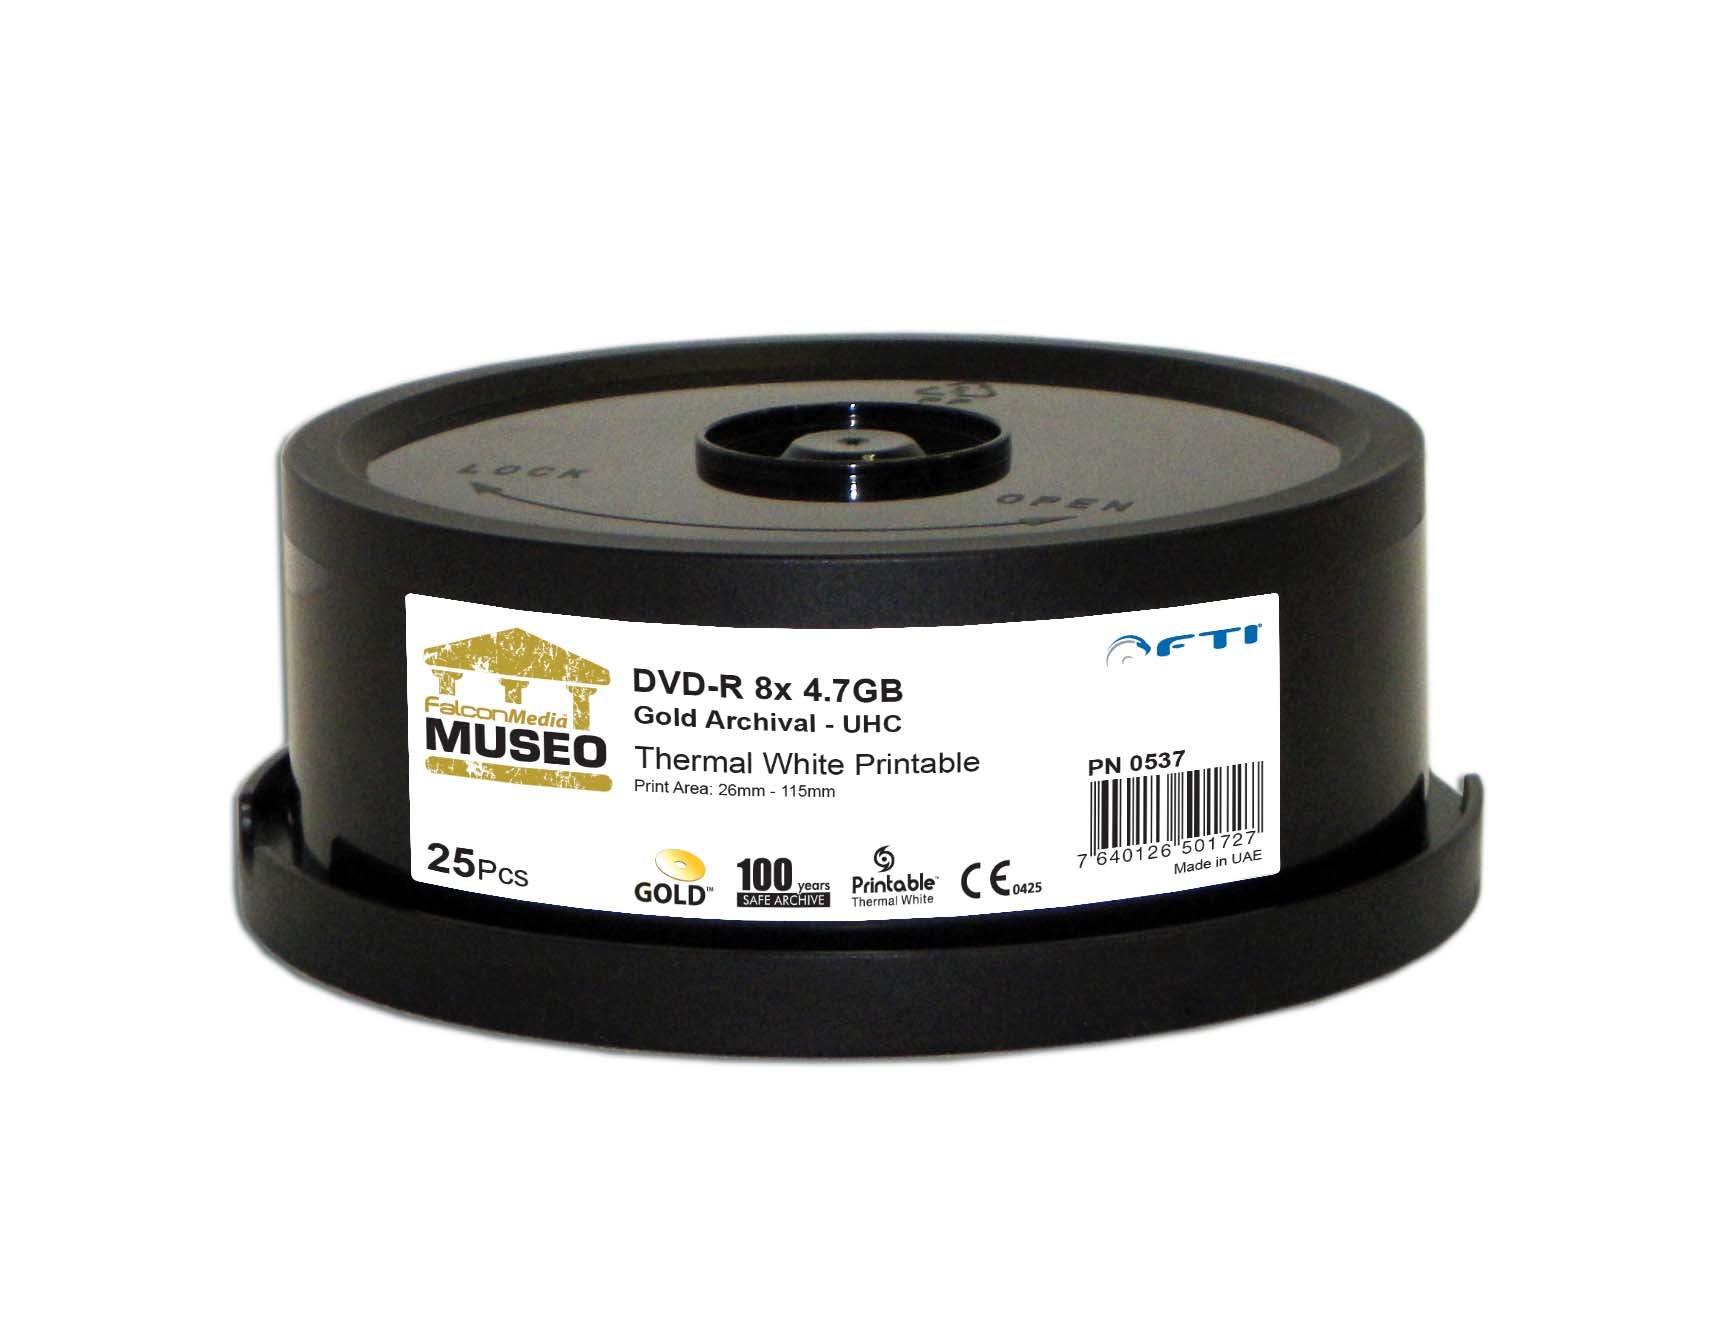 Falcon Media Museo DVD-R 4.7GB 8X Gold Archival (UHC) Thermal White Printable-25pk Spindle MFR # 0537